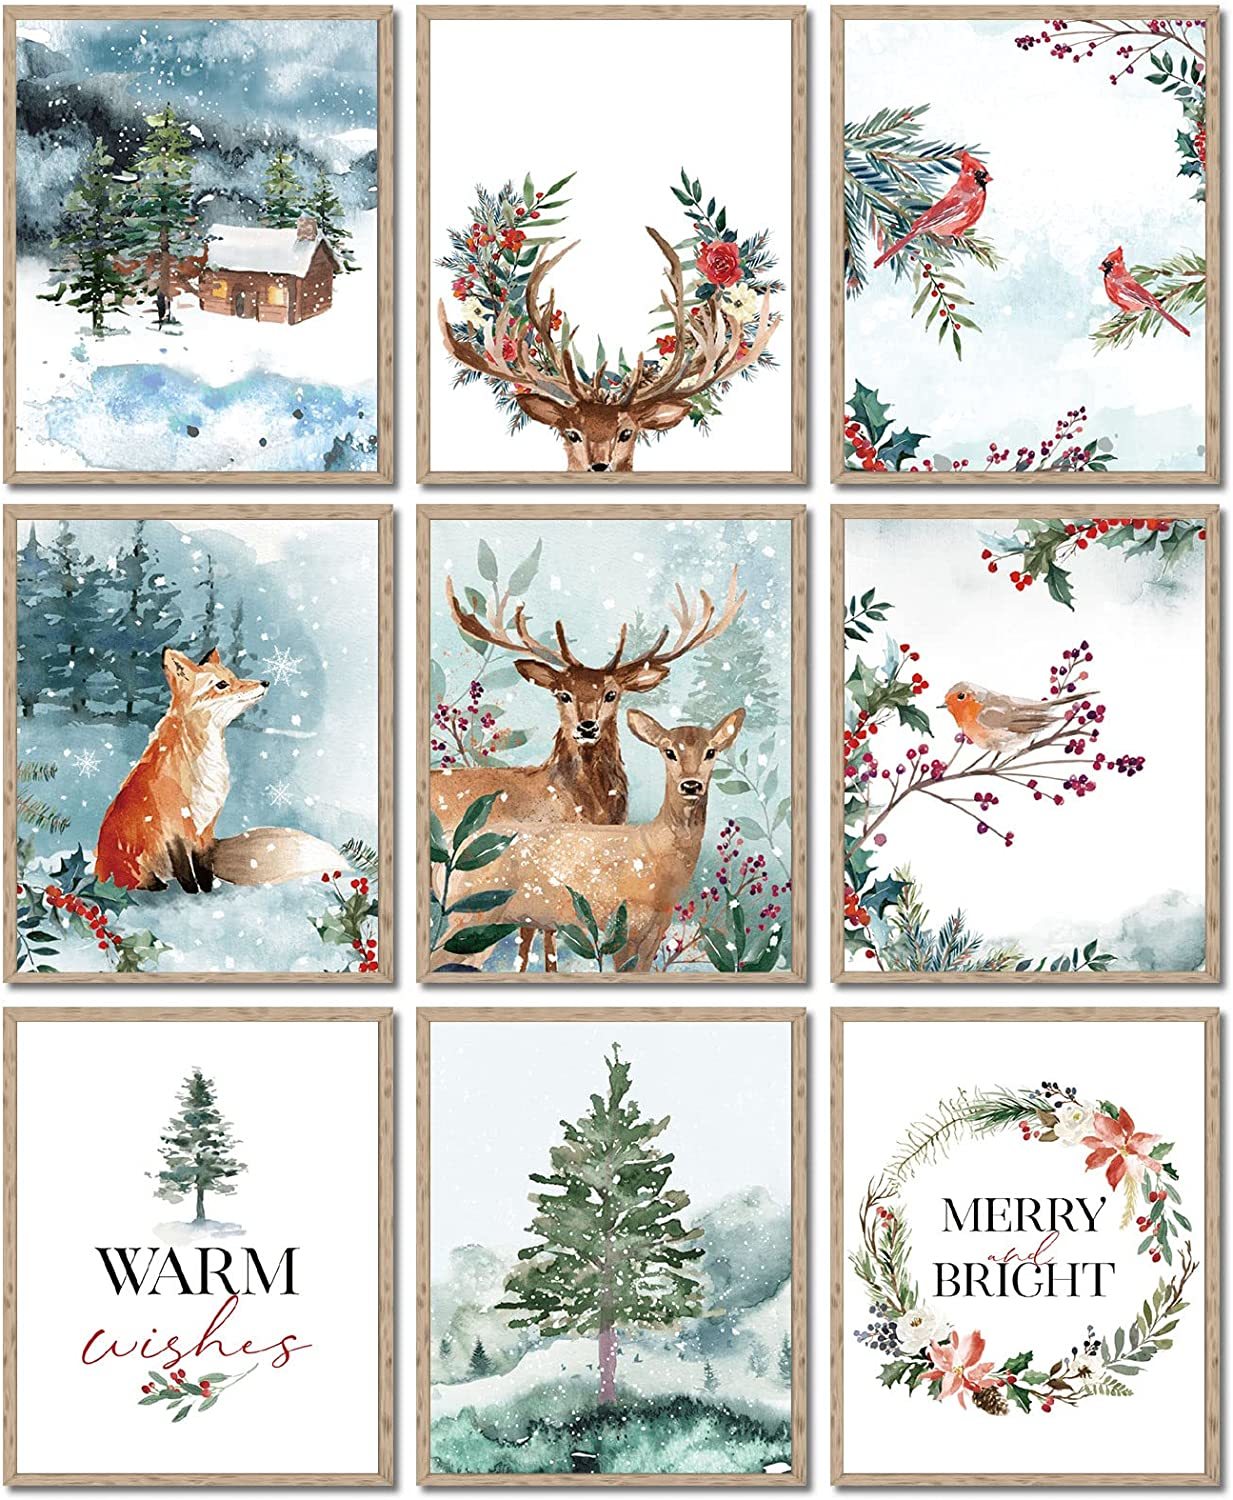 Christmas Wall Art Prints By Anydesign 9 Pcs. Watercolor Woodland, Unframed. - $38.97